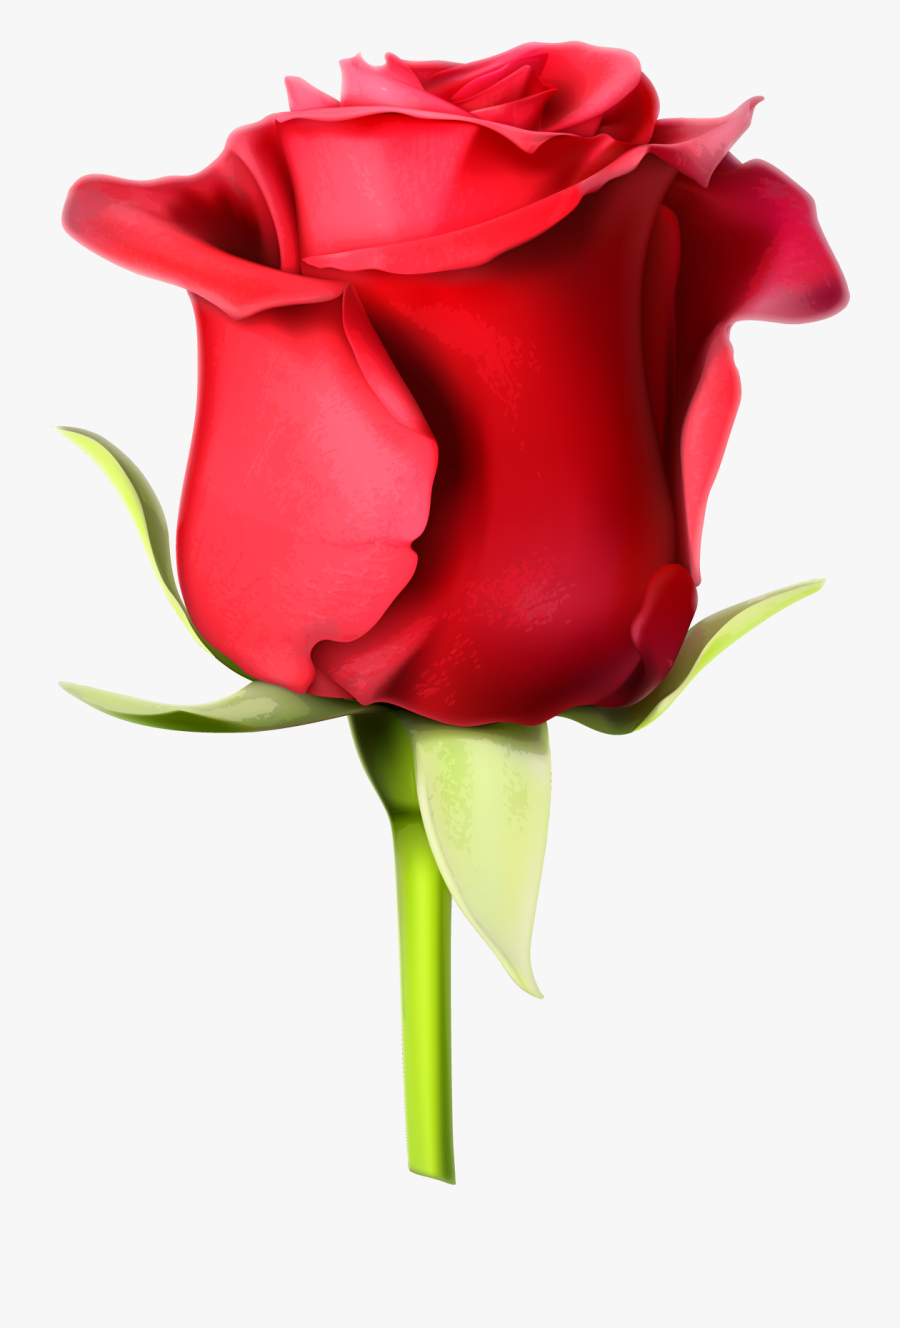 Rose Images Hd Download Clipart , Png Download.